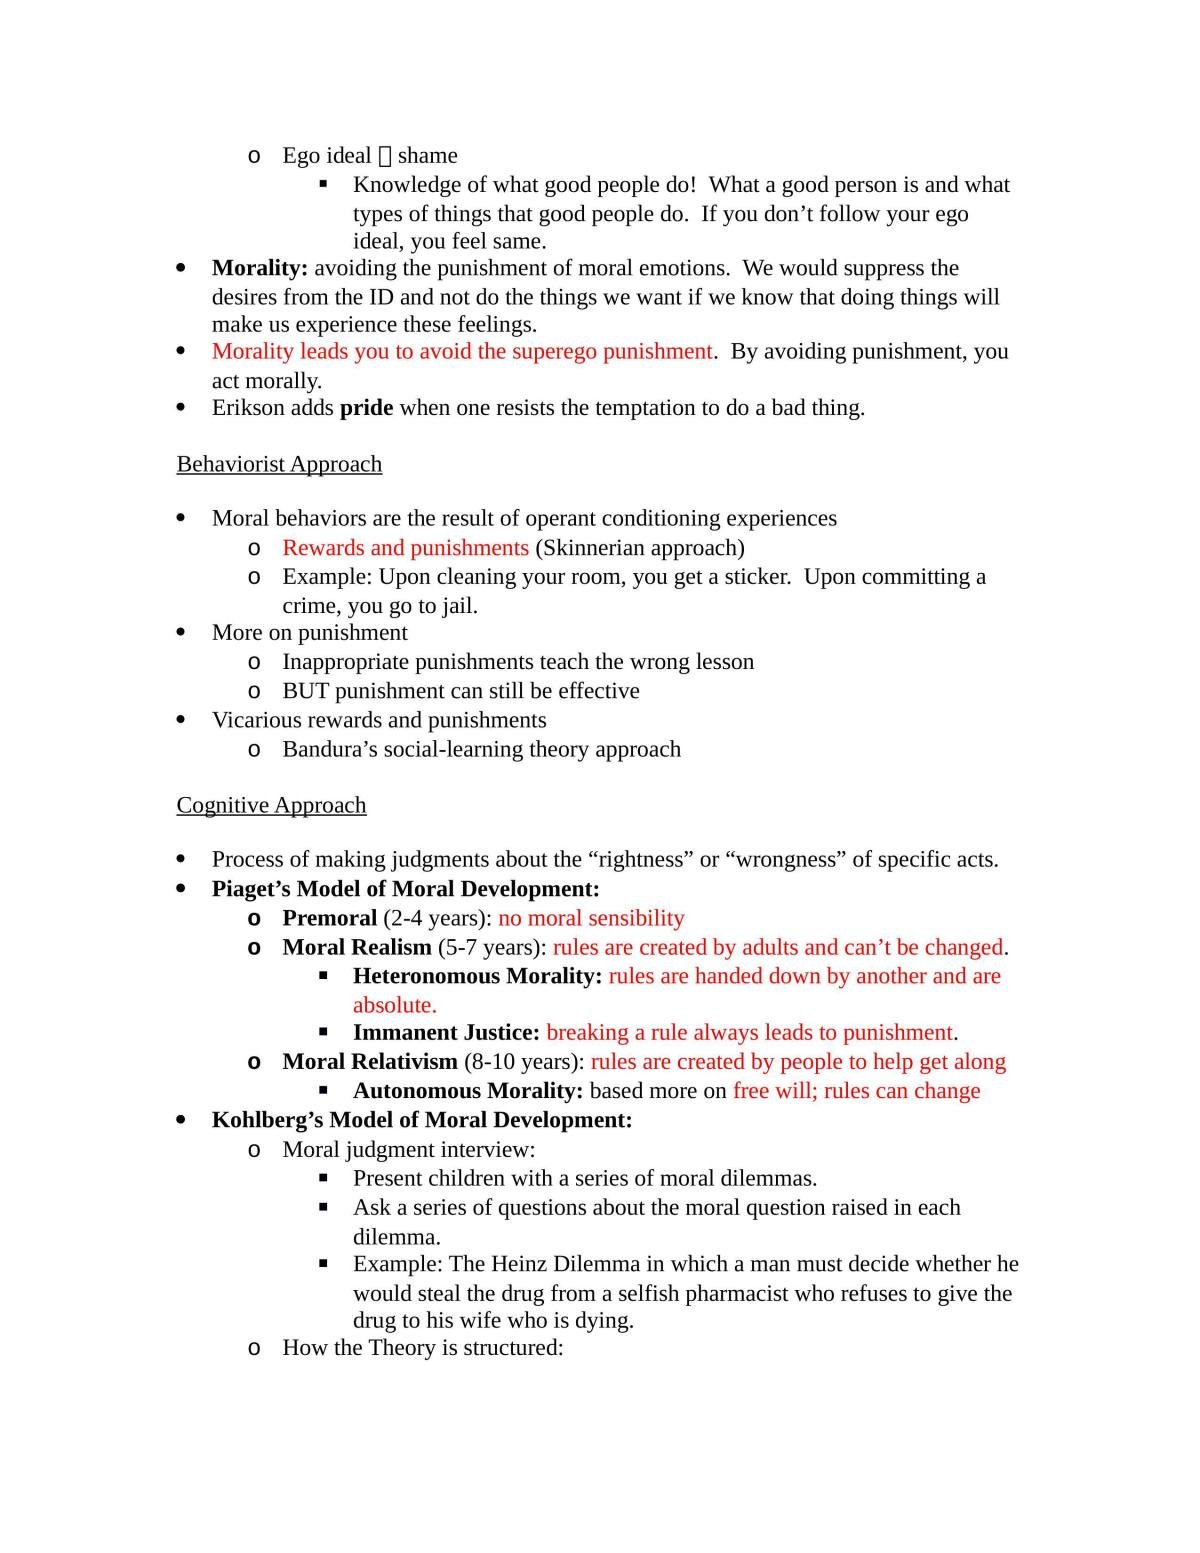 Complete Study Notes - PYSCH 2AA3 - Page 26